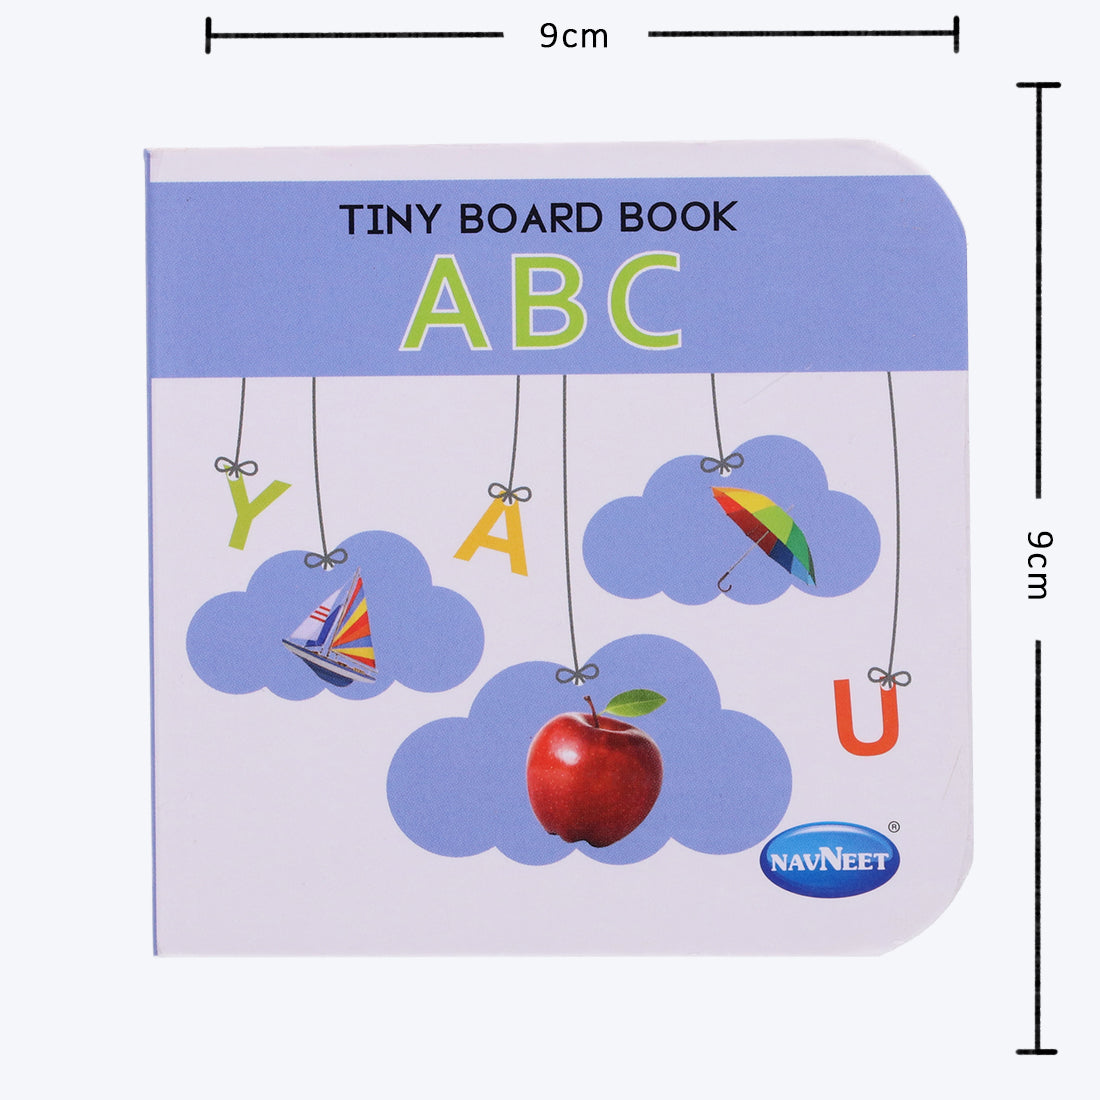 Navneet Tiny Board Book Library- Best Picture board books for babies & toddlers: 5 Books- ABC, Numbers, Hindi Varnamala, Shapes and Colours,Domestic and Aquatic animals- Early Learning Books